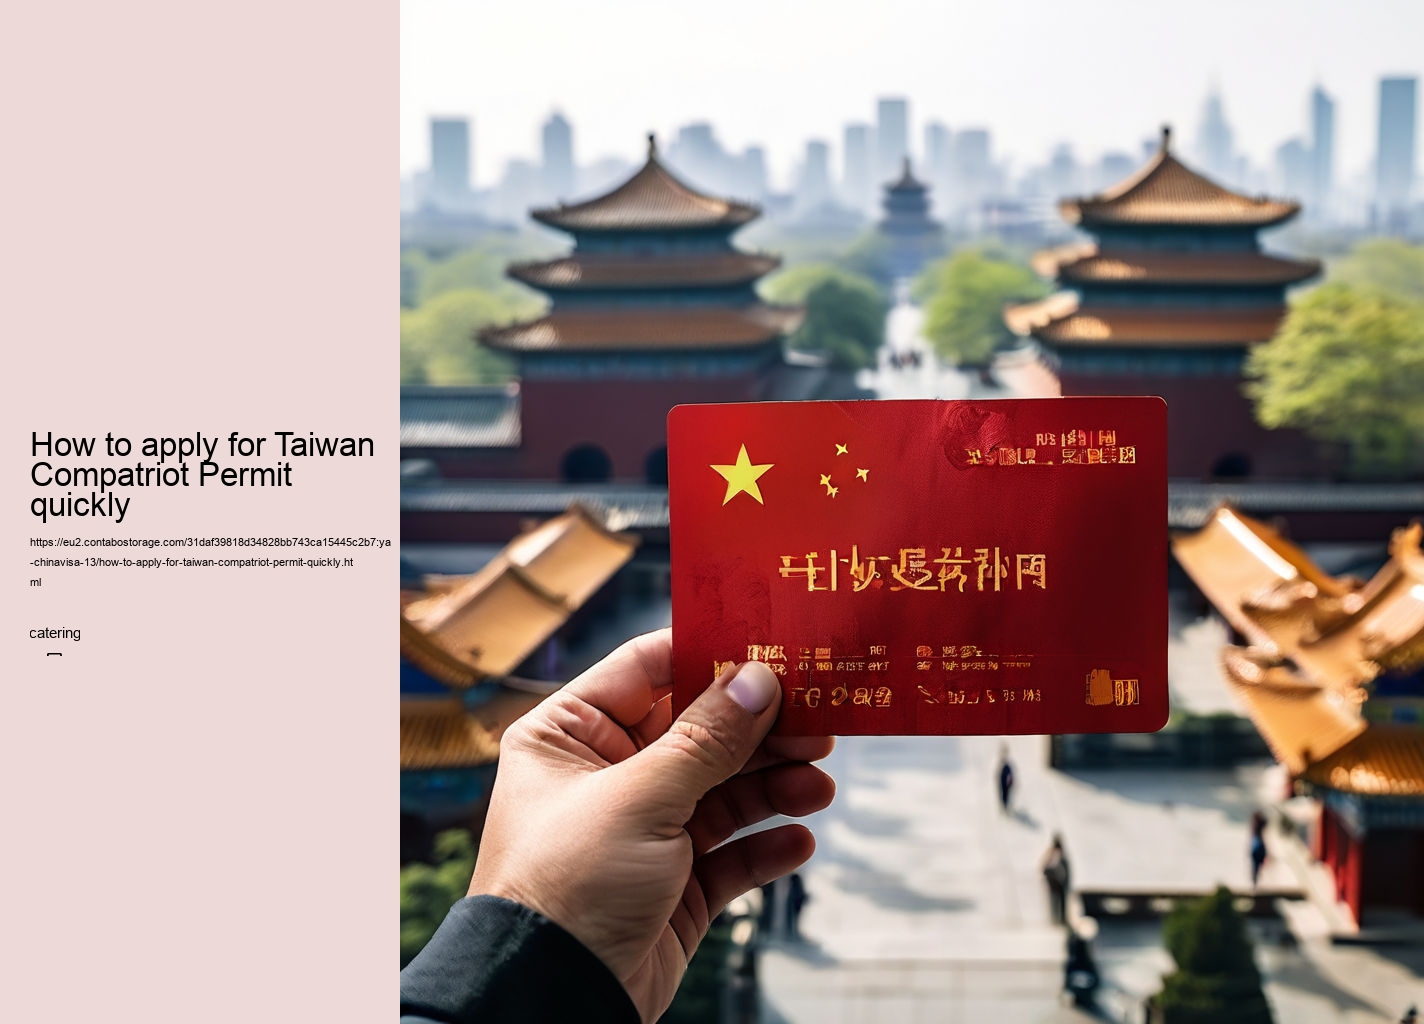 How to apply for Taiwan Compatriot Permit quickly